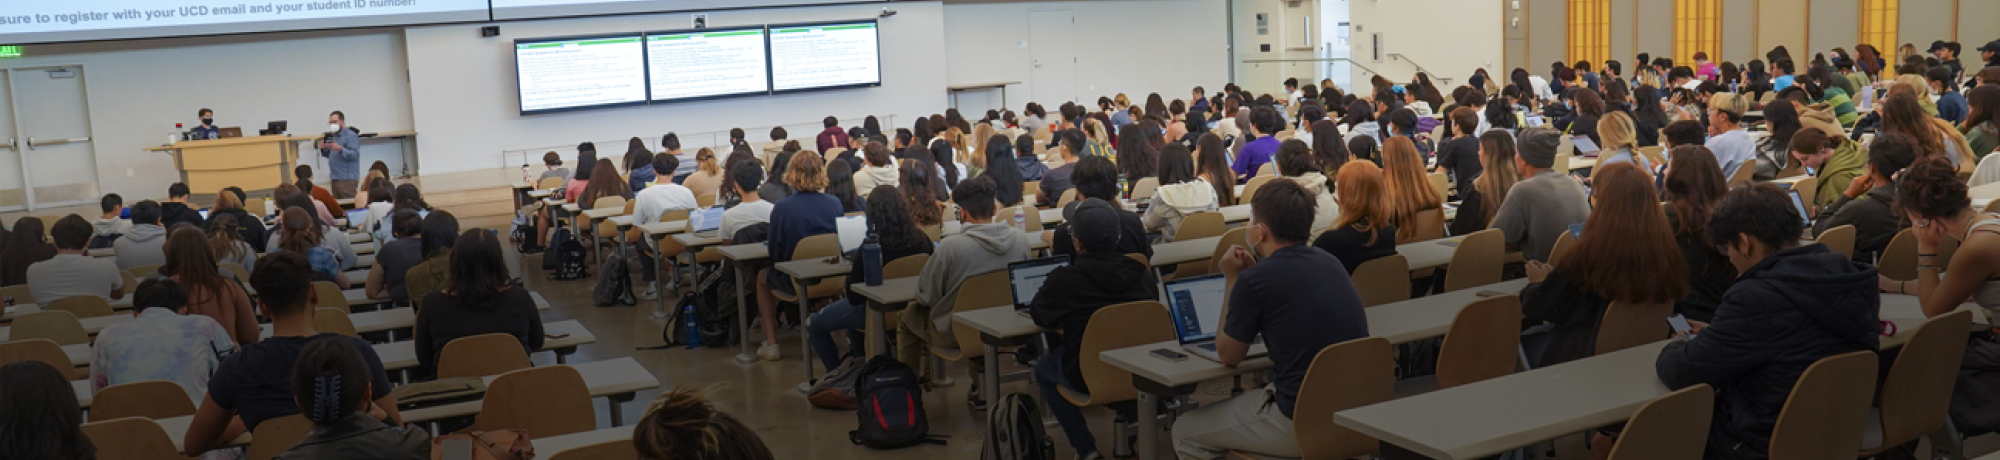 Large classroom with many students and large display screens